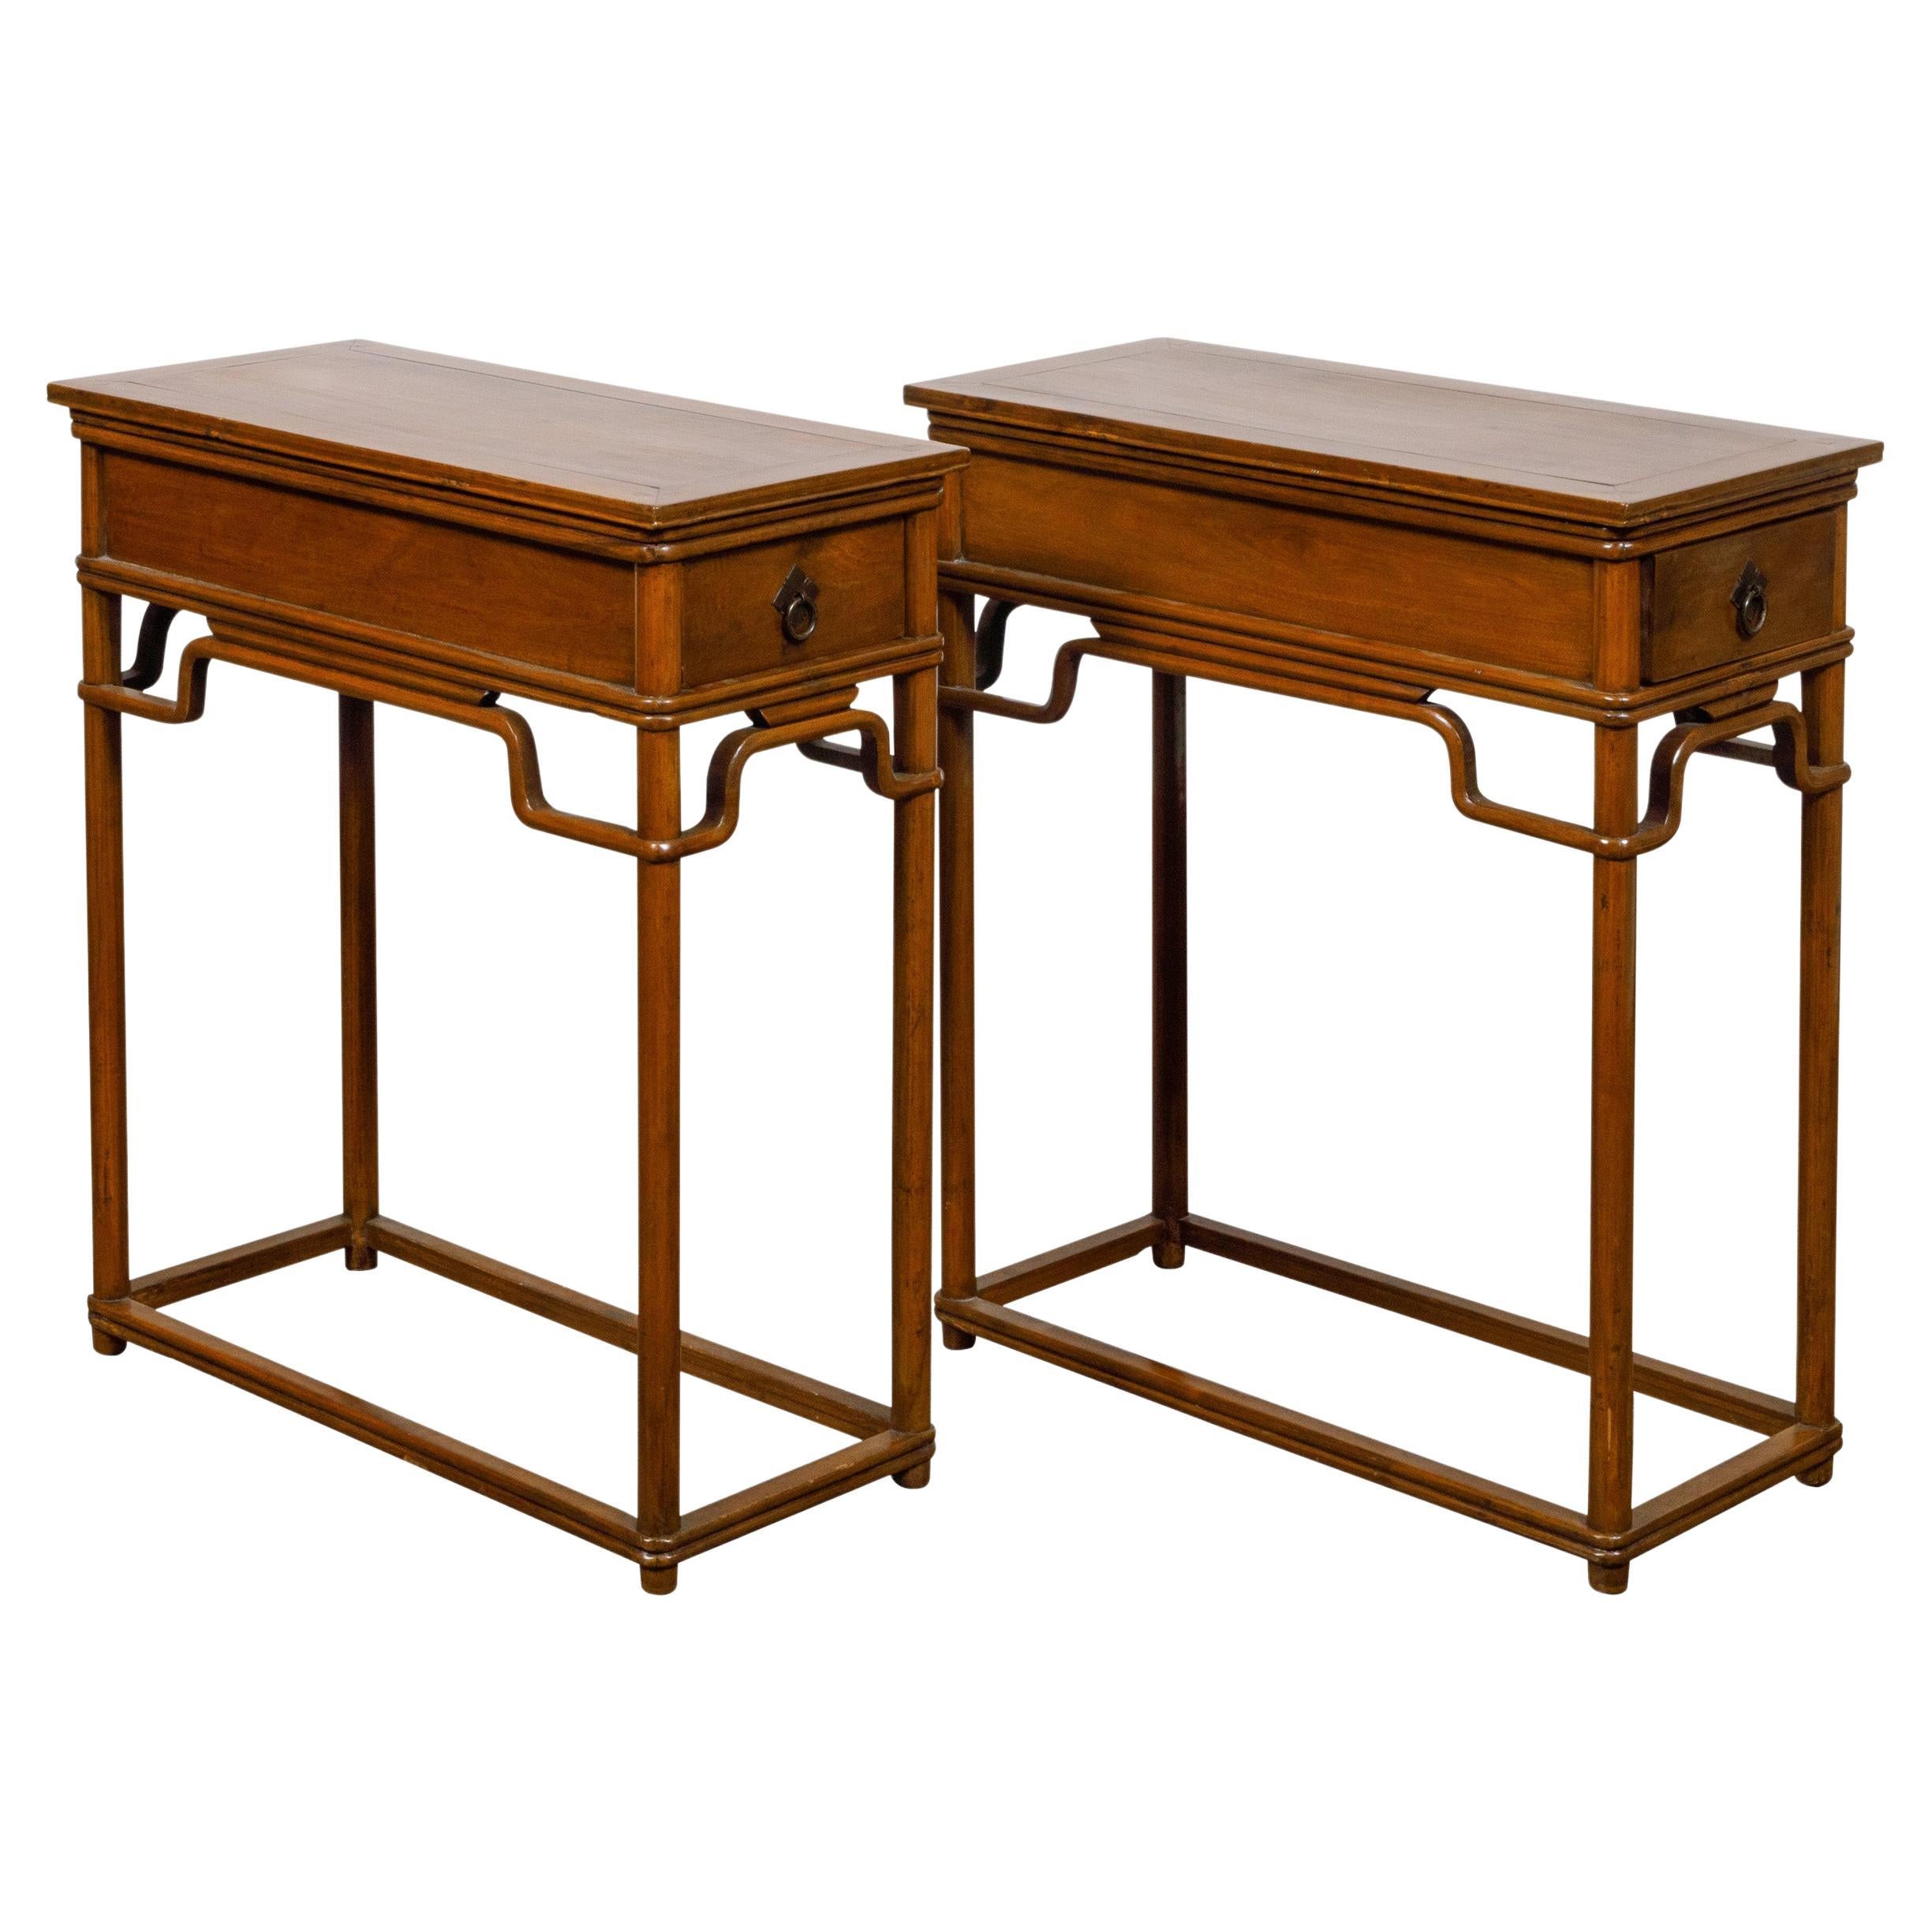 Pair of Teak 19th Century Console Tables with Drawers and Humpback Stretchers